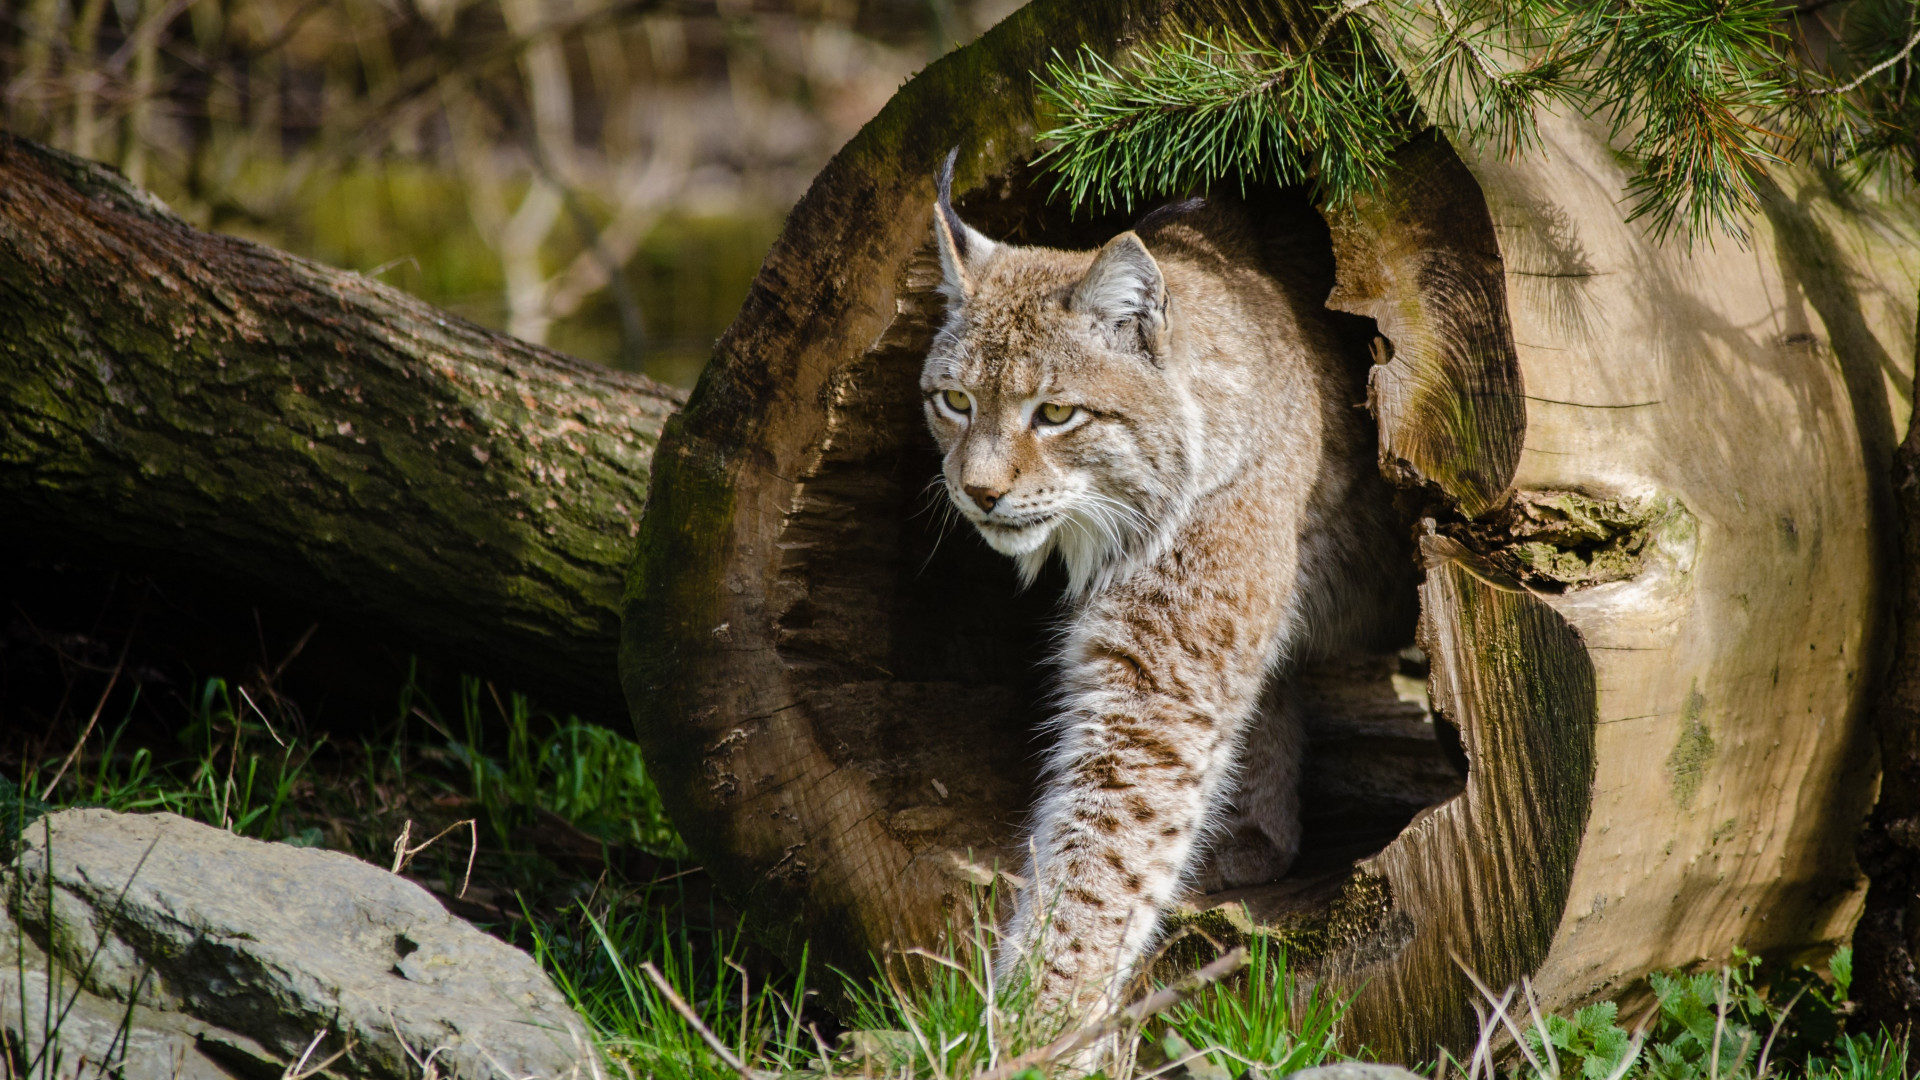 Lynx at the Zoo wallpaper 1920x1080